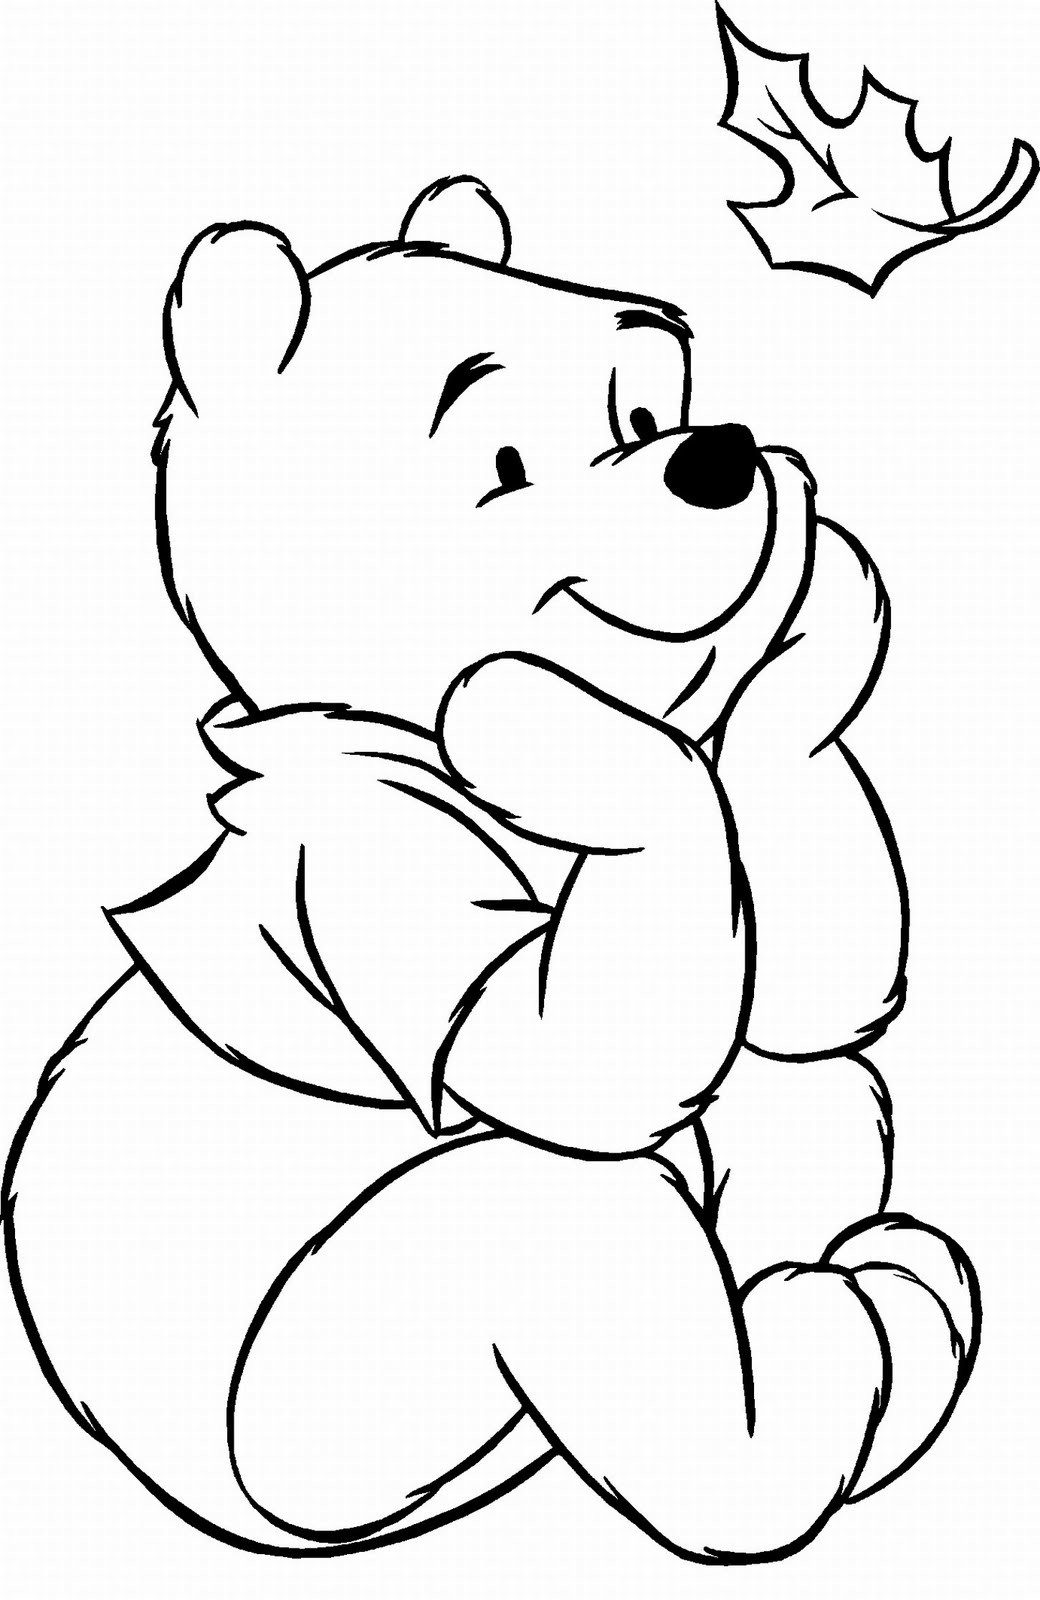 Coloring Pages Printable Disney
 Disney Thanksgiving Coloring Pages Winnie The Pooh